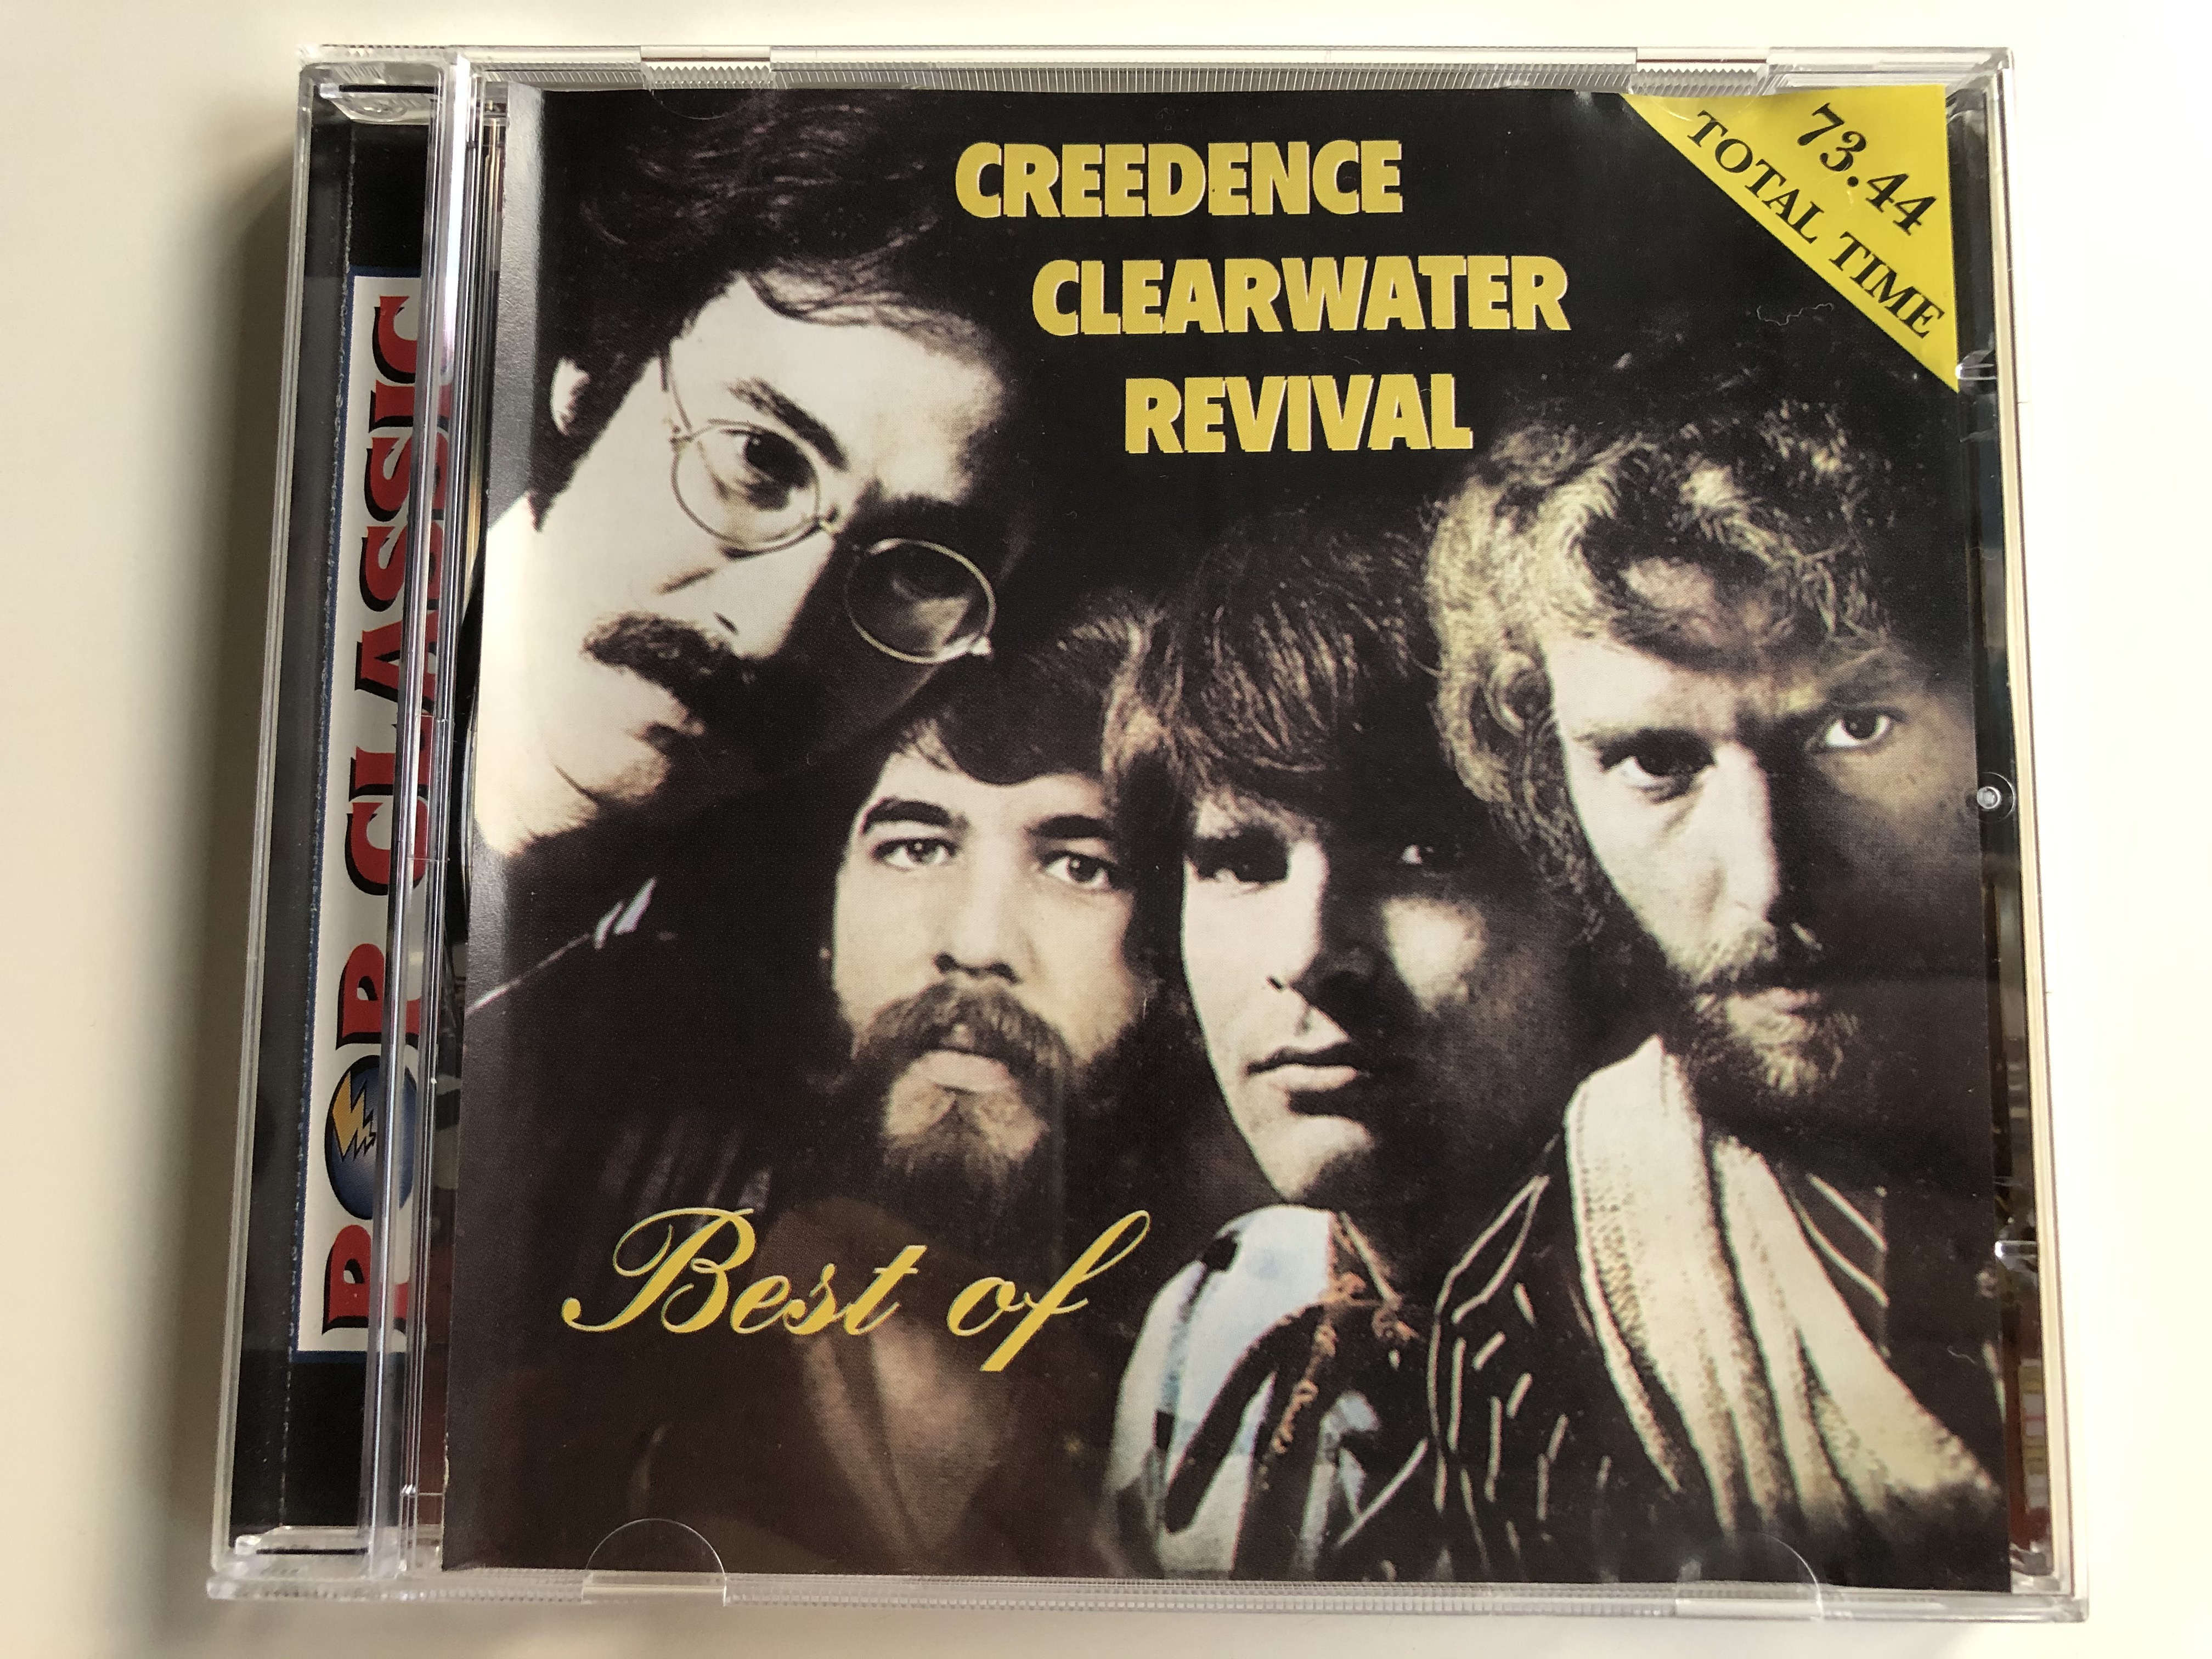 creedence-clearwater-revival-best-of-total-time-73.44-pop-classic-euroton-audio-cd-eucd-0001-1-.jpg